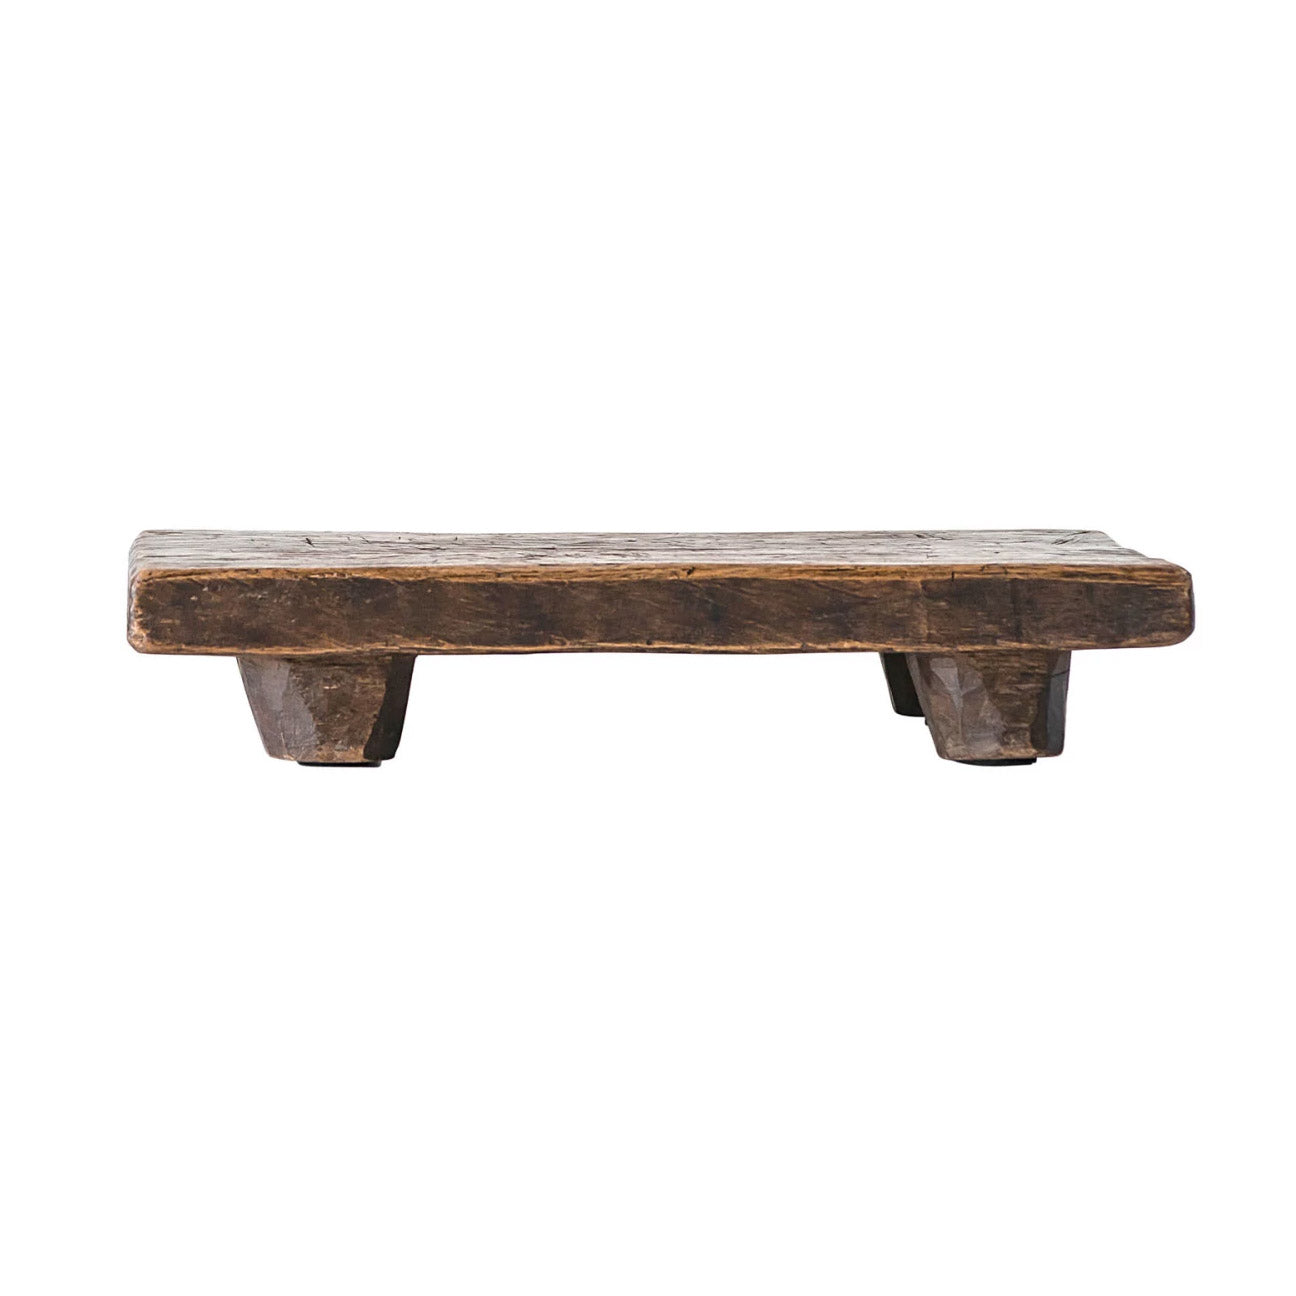 Enhance Your Culinary Experience: Rustic White Wood Riser with